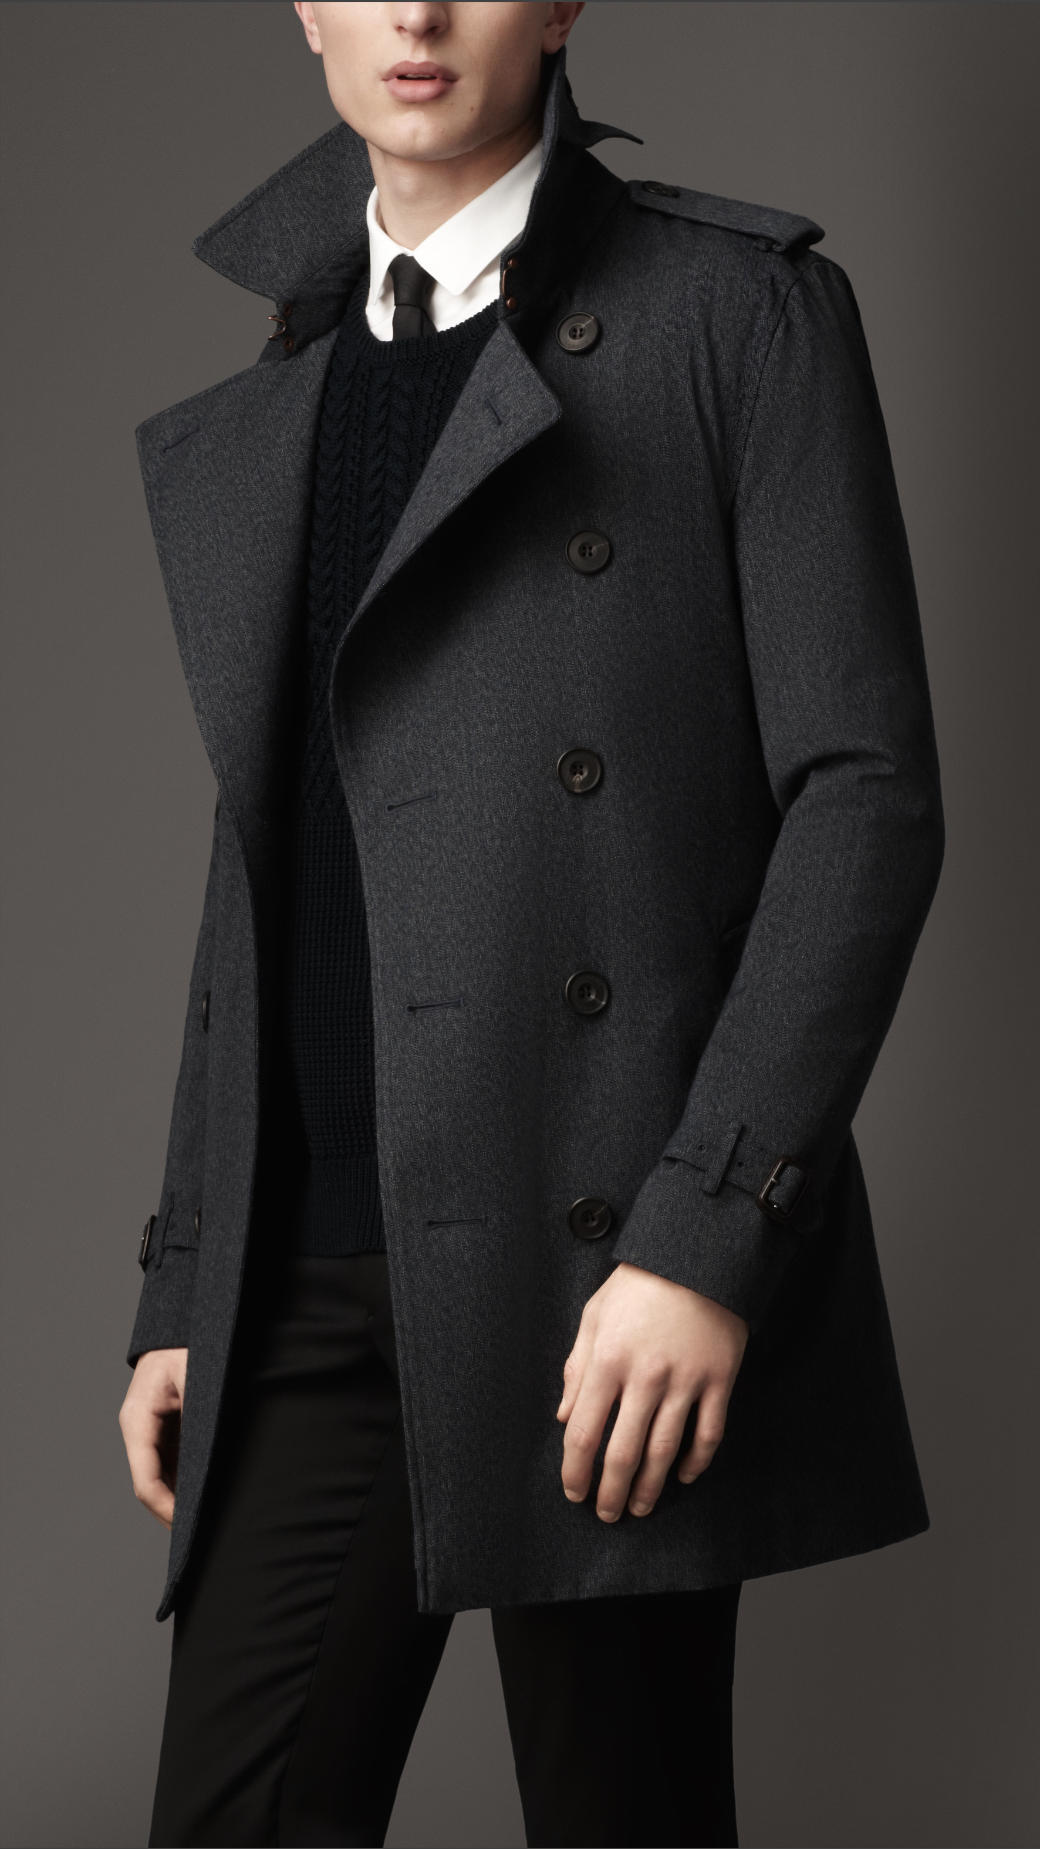 Lyst - Burberry Midlength Technical Wool Warmer Trench Coat in Blue for Men